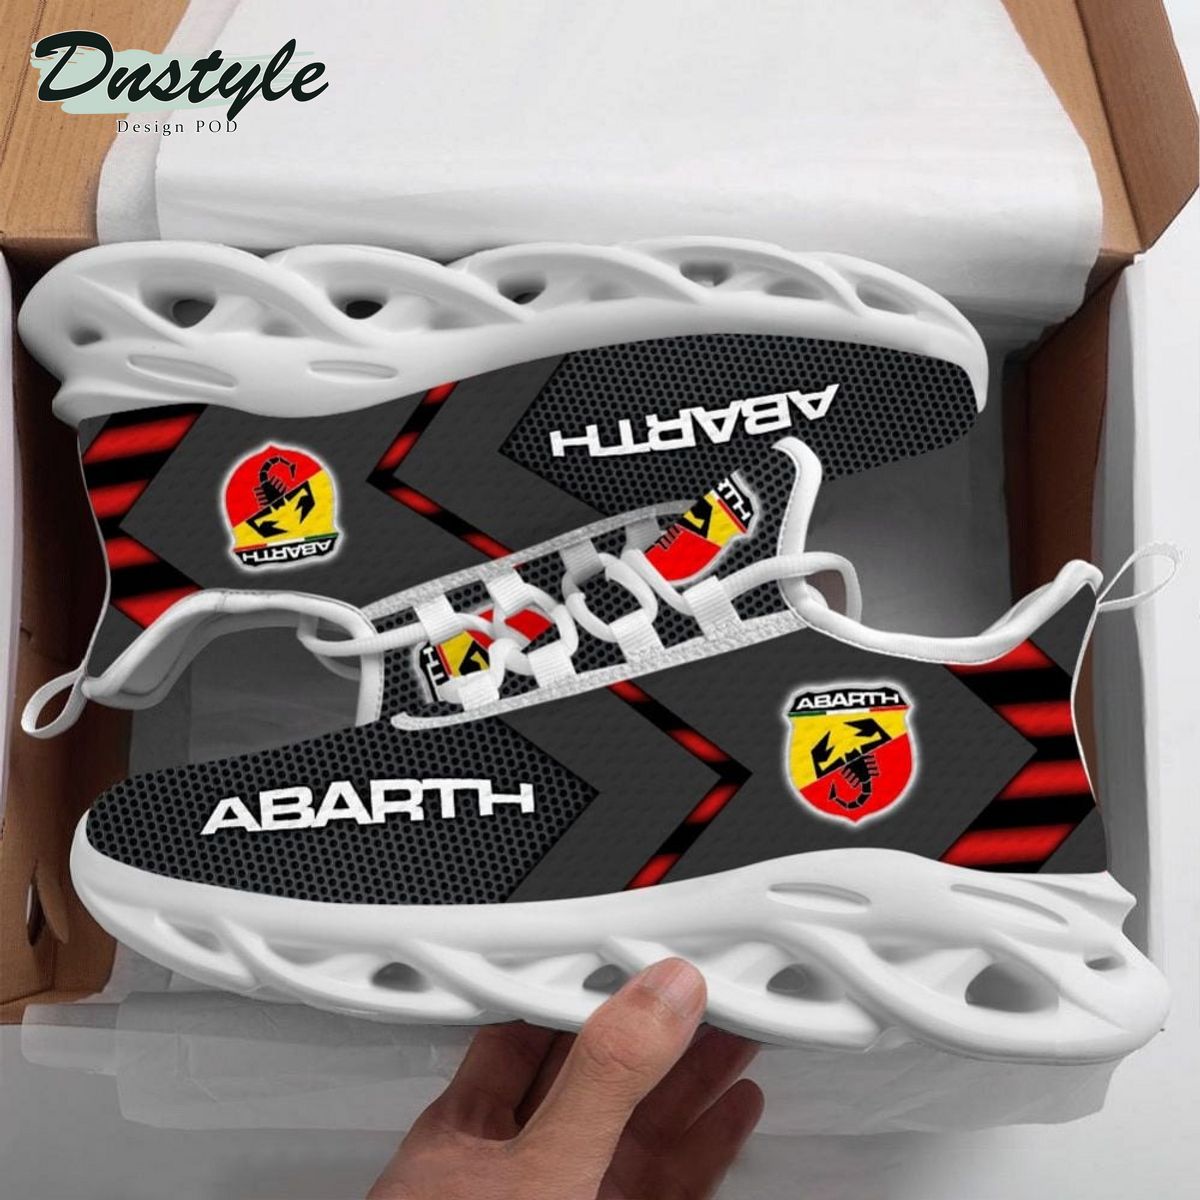 Abarth Clunky Max Soul Sneaker